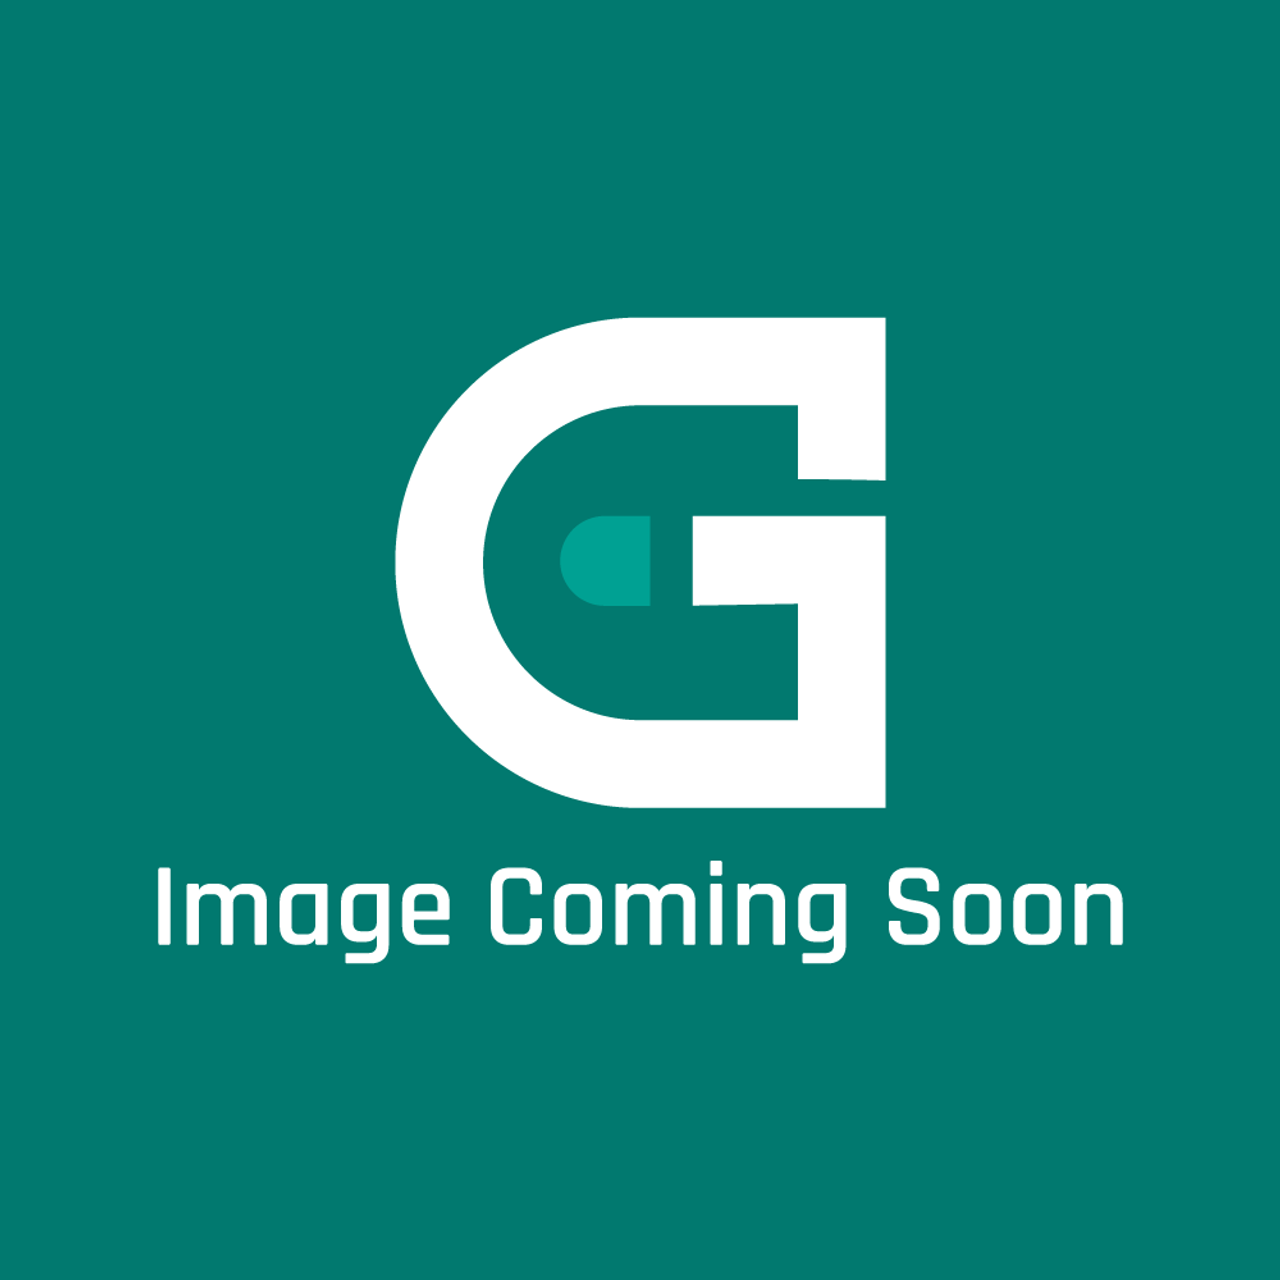 Southbend 4440162 - Int Gas Hook-Upcm-31 On Sect - Image Coming Soon!